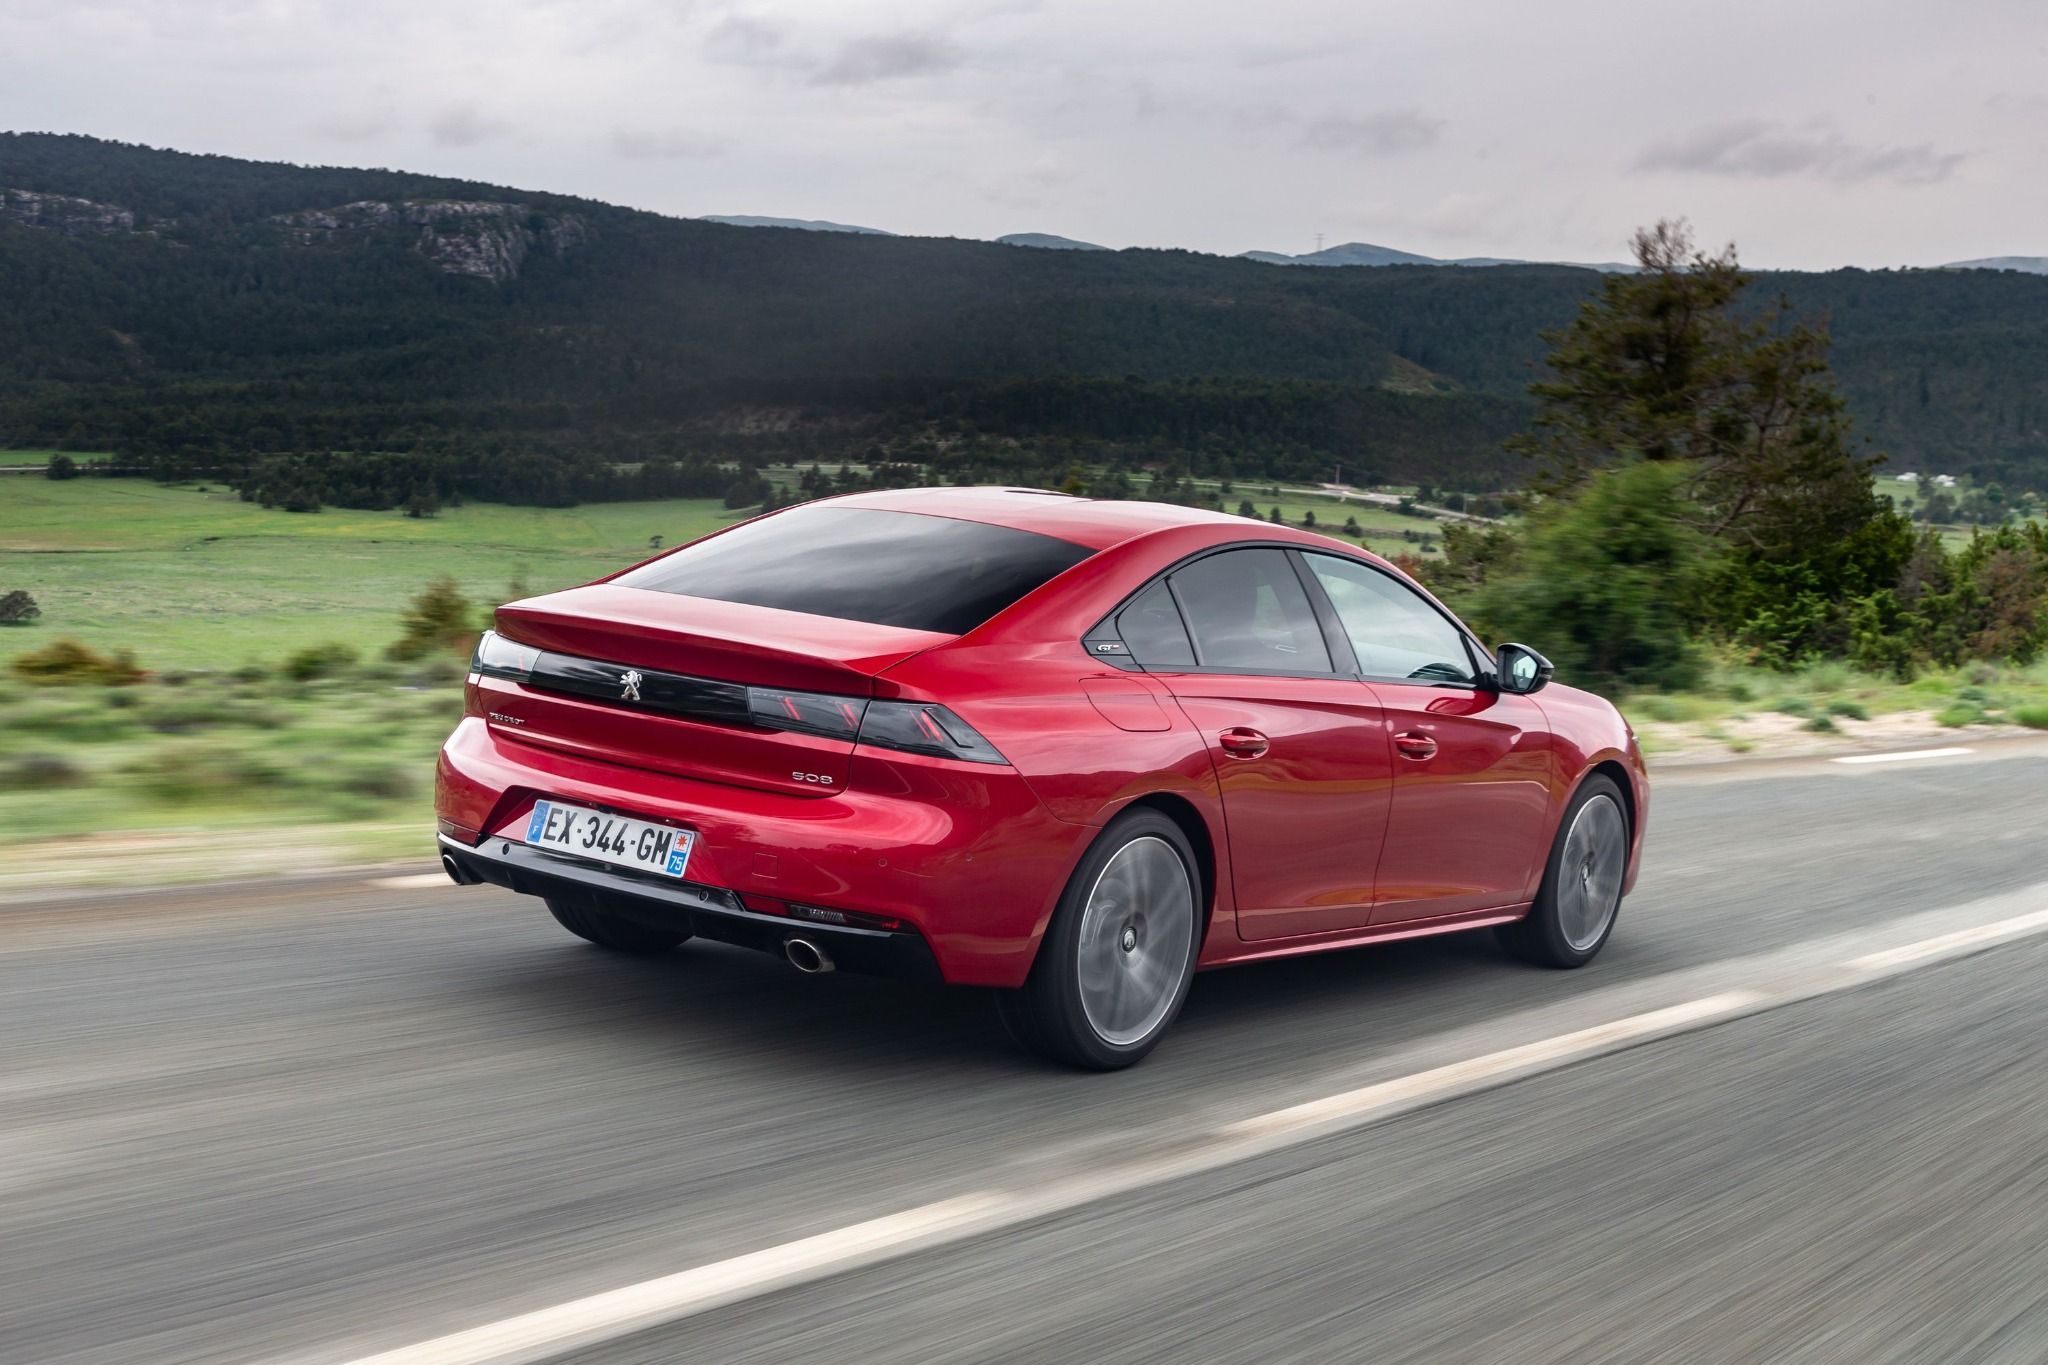 2018 Red Peugeot 508